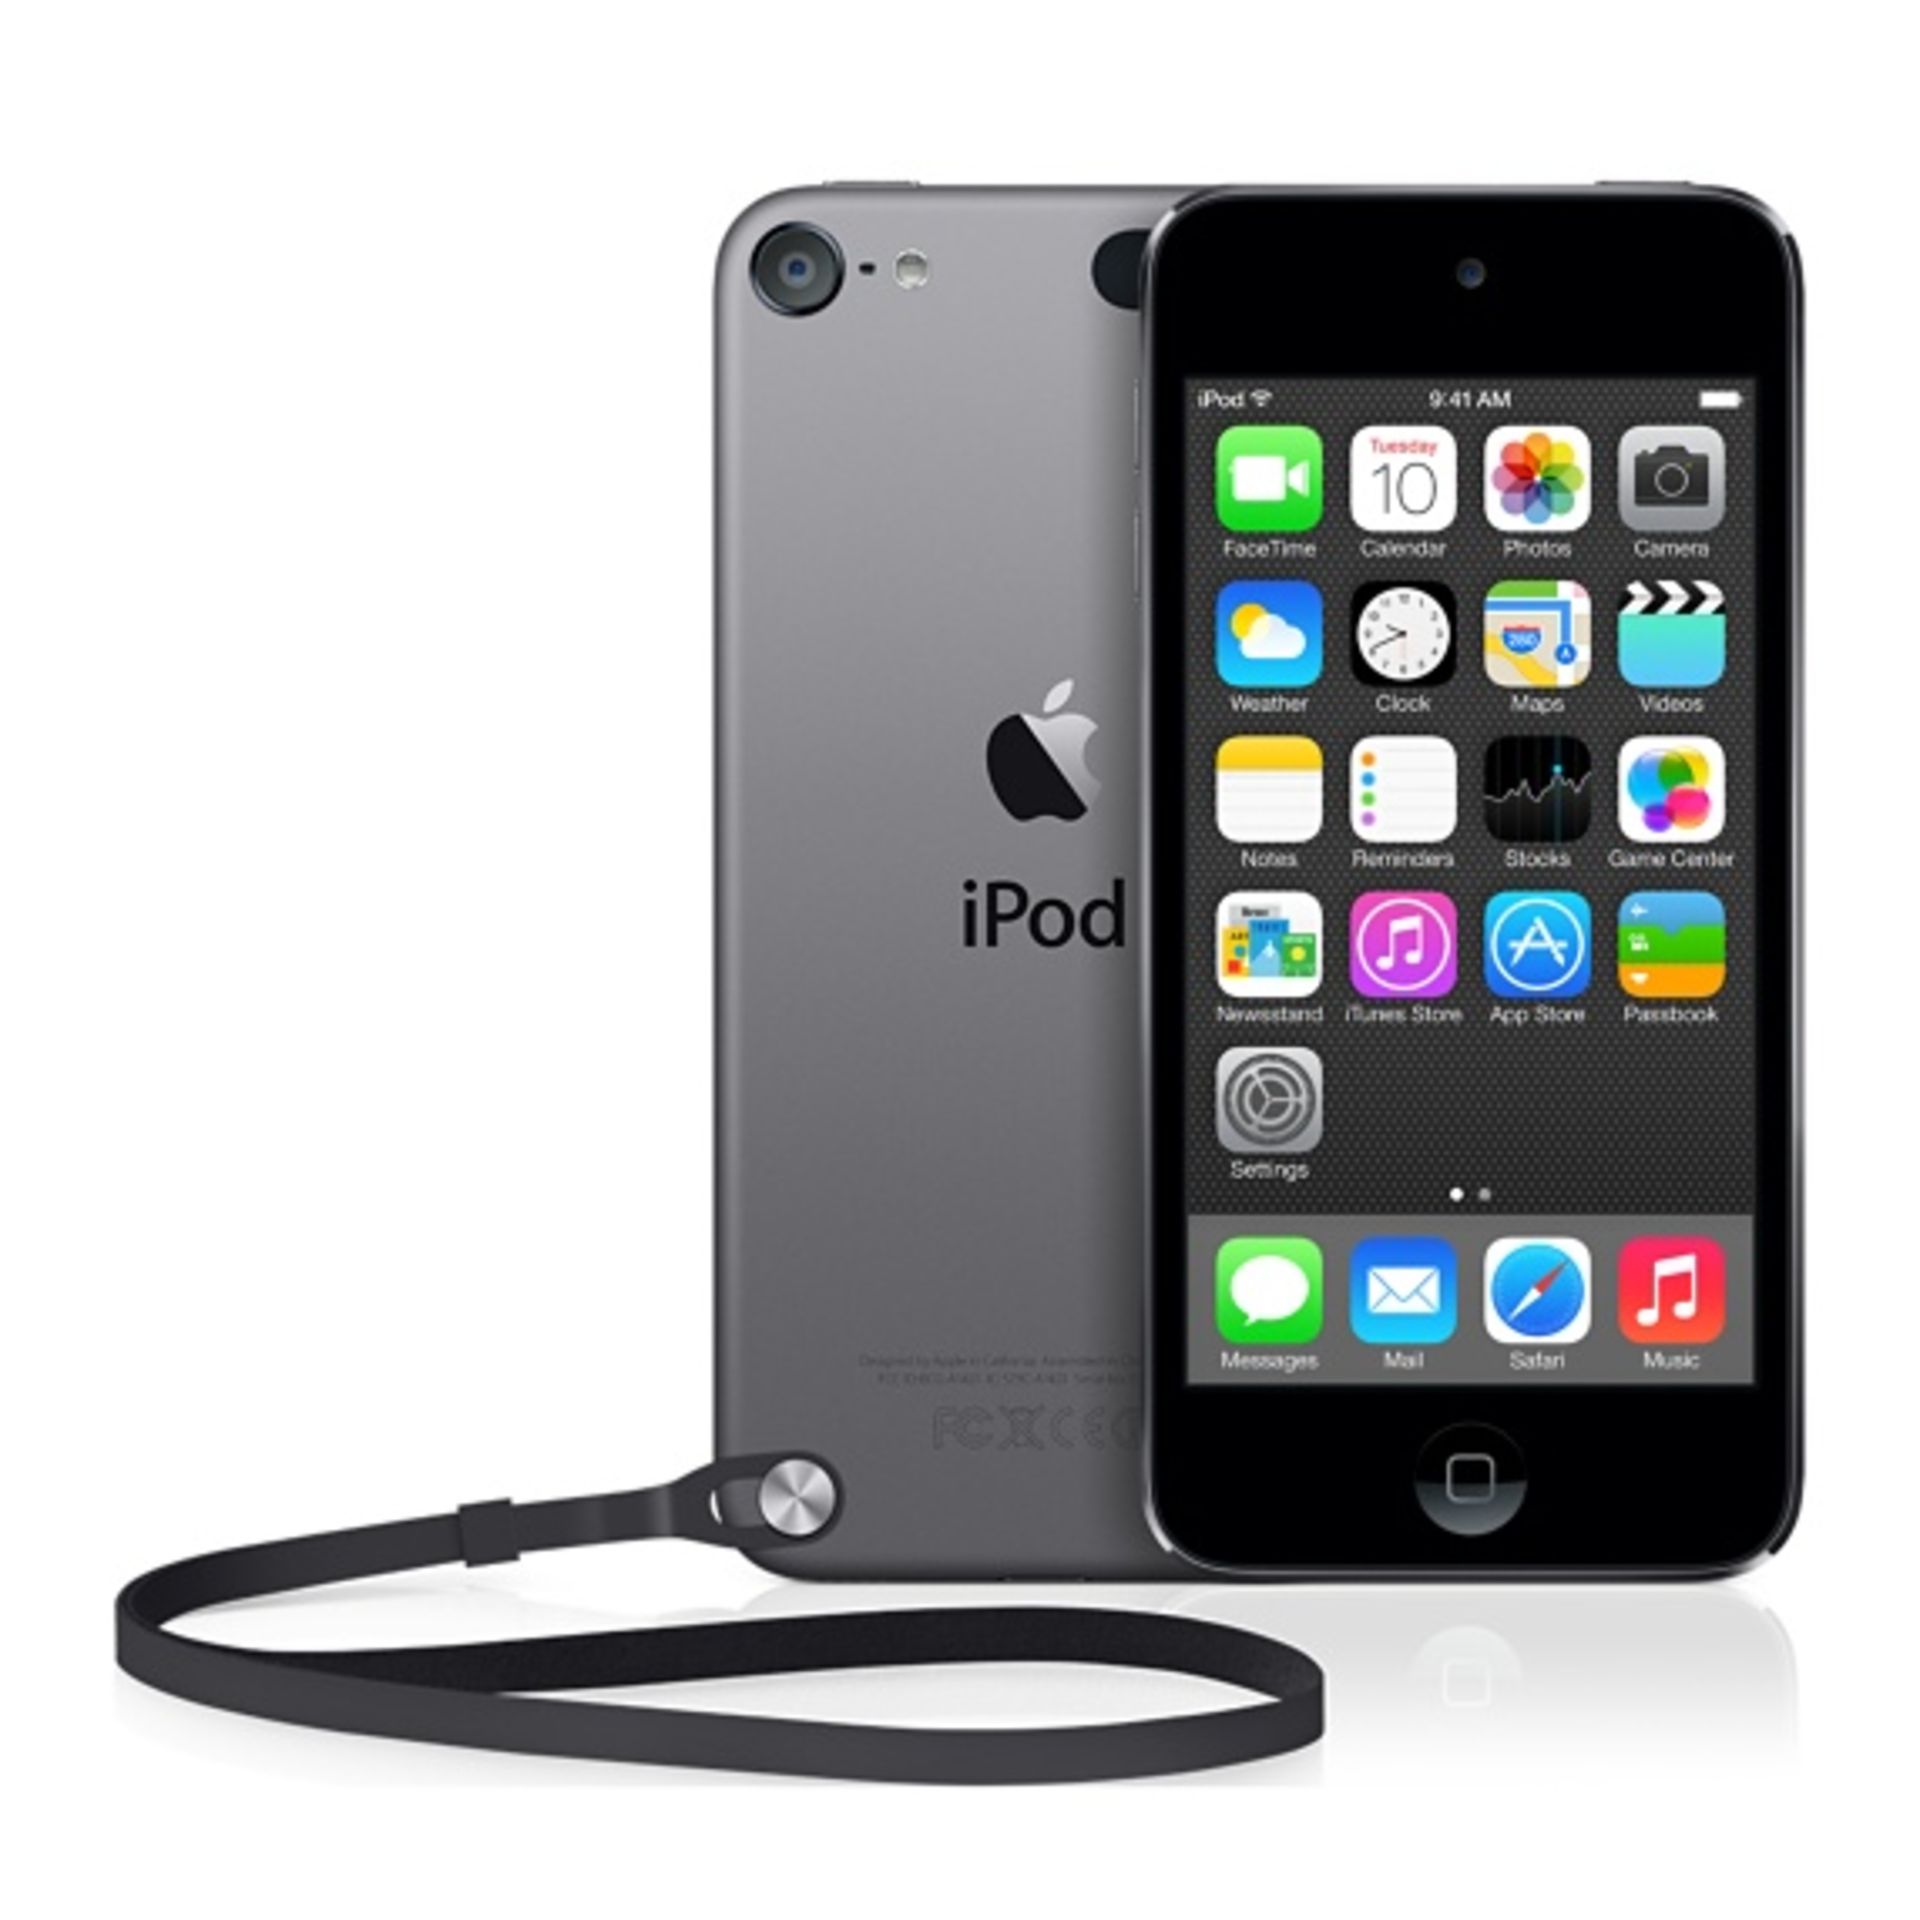 V Grade A Apple iPod Touch 32GB / 5th Gen - Space Grey